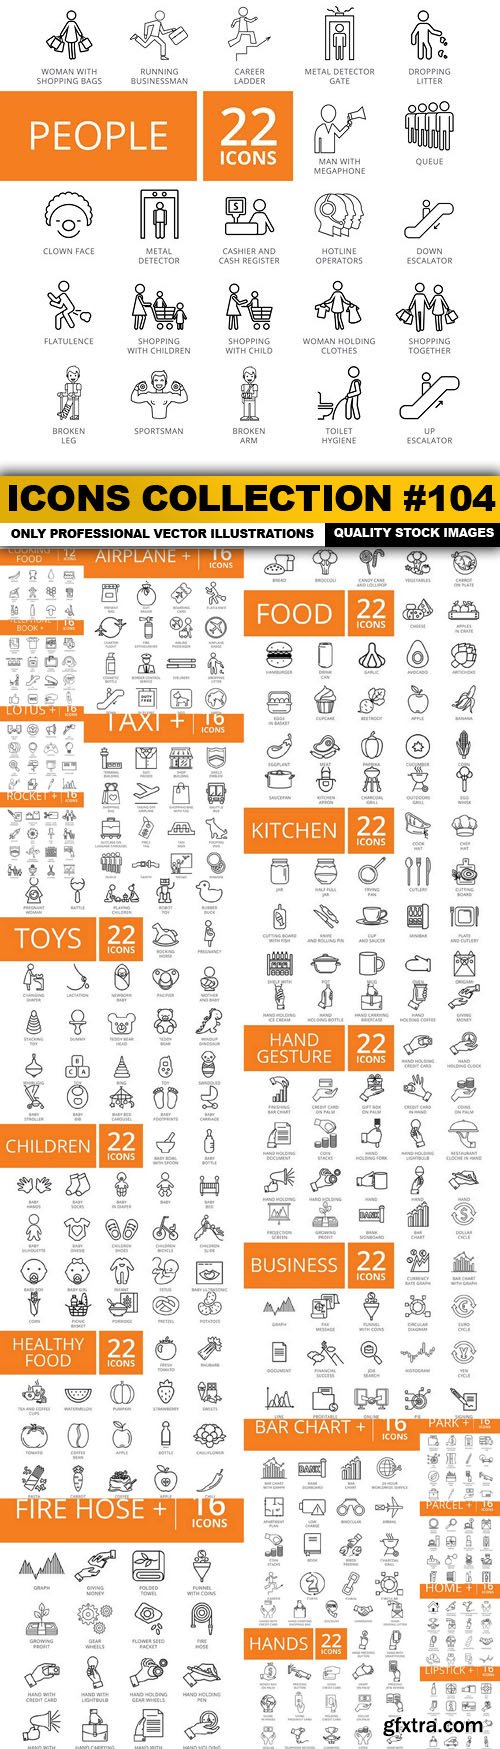 Icons Collection #104 - 22 Vector